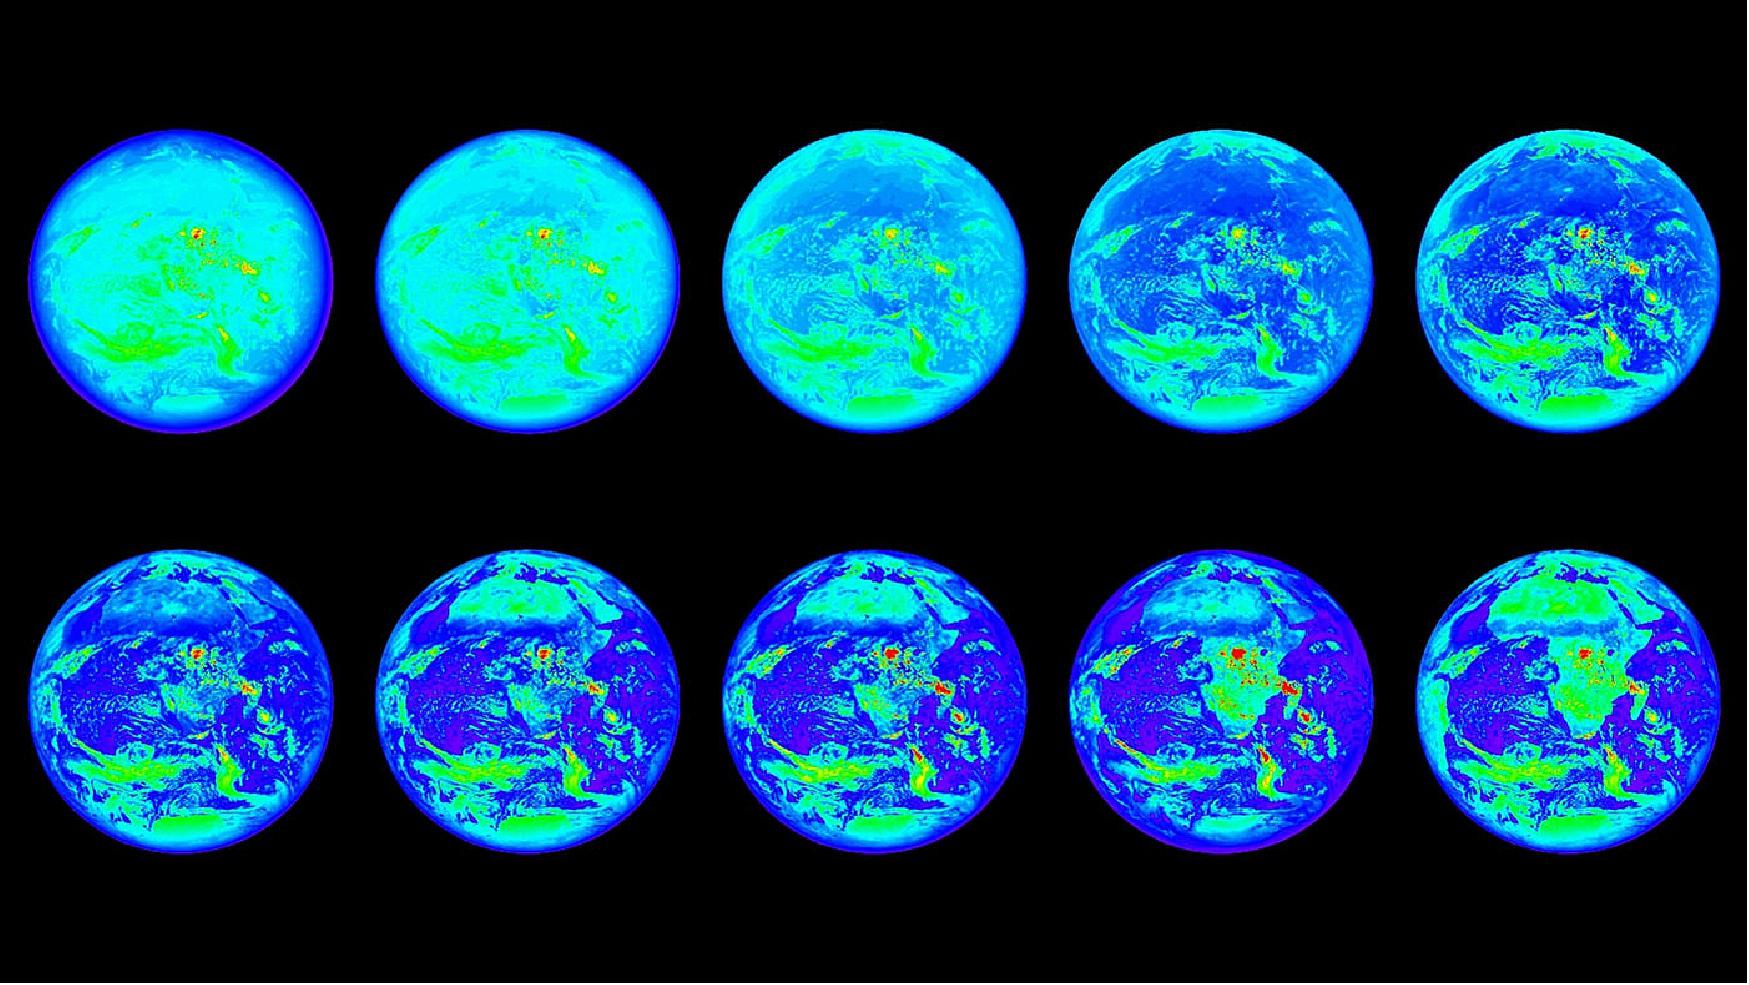 Figure 22: These images show the sunlit side of Earth in 10 different wavelengths of light that fall within the infrared, visible and ultraviolet ranges; the images are representational-color, because not all of these wavelengths are visible to the human eye. Each wavelength highlights different features of the planet — for example, the continent of Africa is visible in the lower right image, but is nearly invisible in the upper left image. These observations were obtained by NASA's EPIC instrument onboard NOAA's DSCOVR, satellite, on Aug. 2, 2017 (image credit: NASA/NOAA)